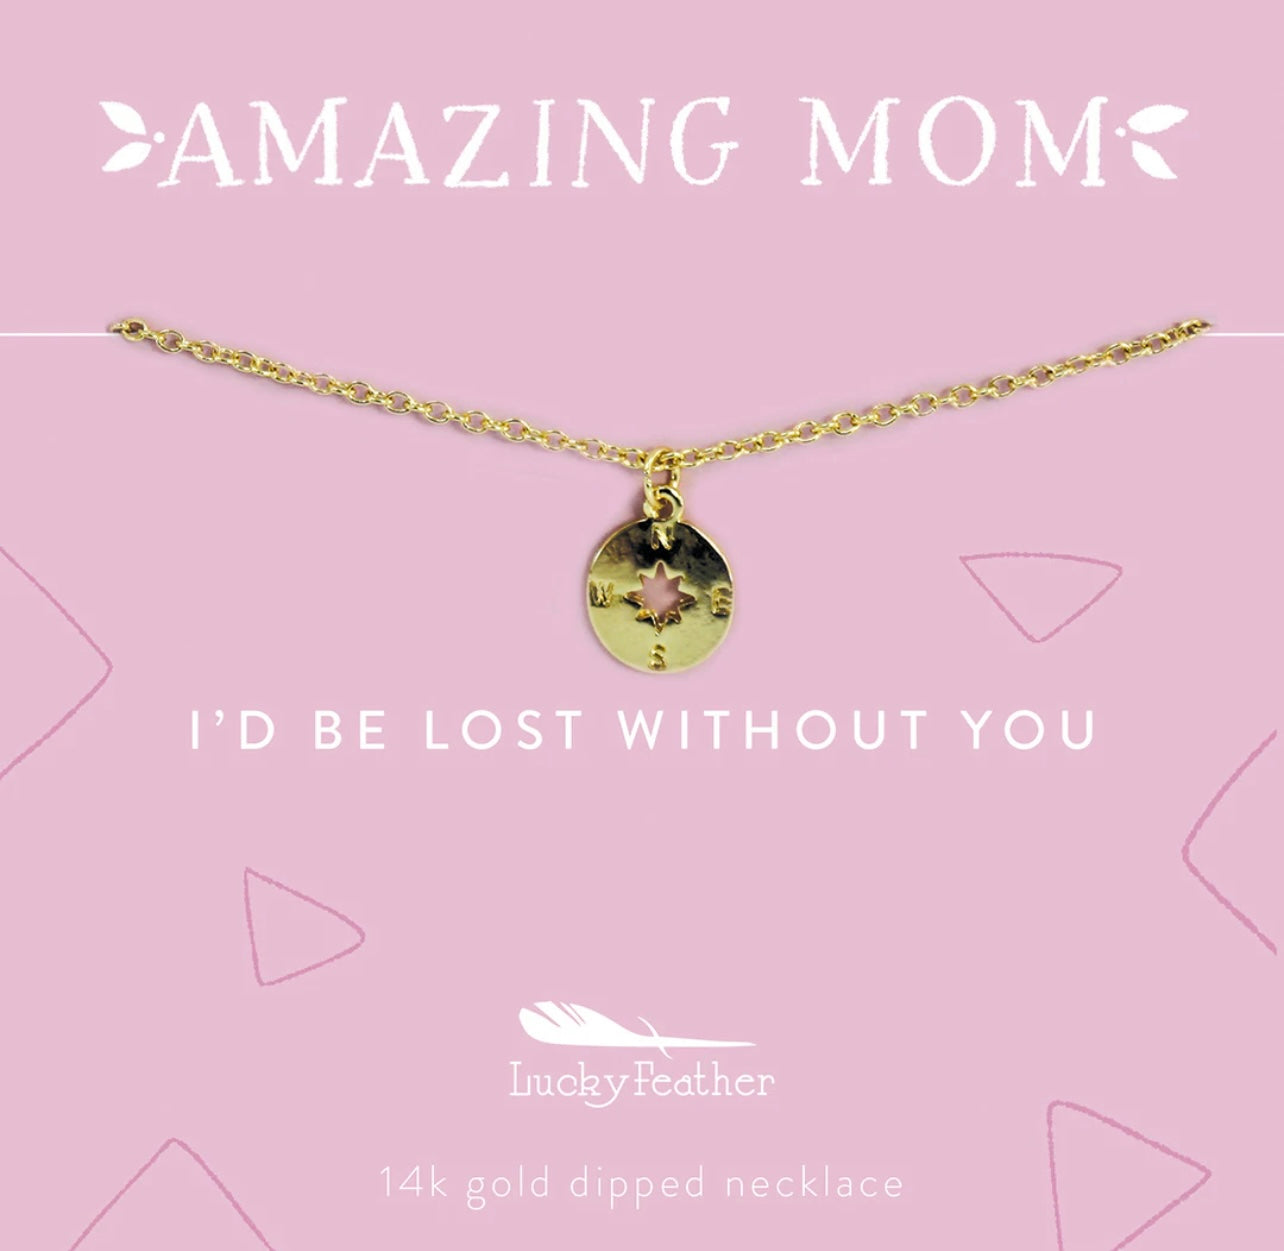 Lucky Feather Mom Necklace